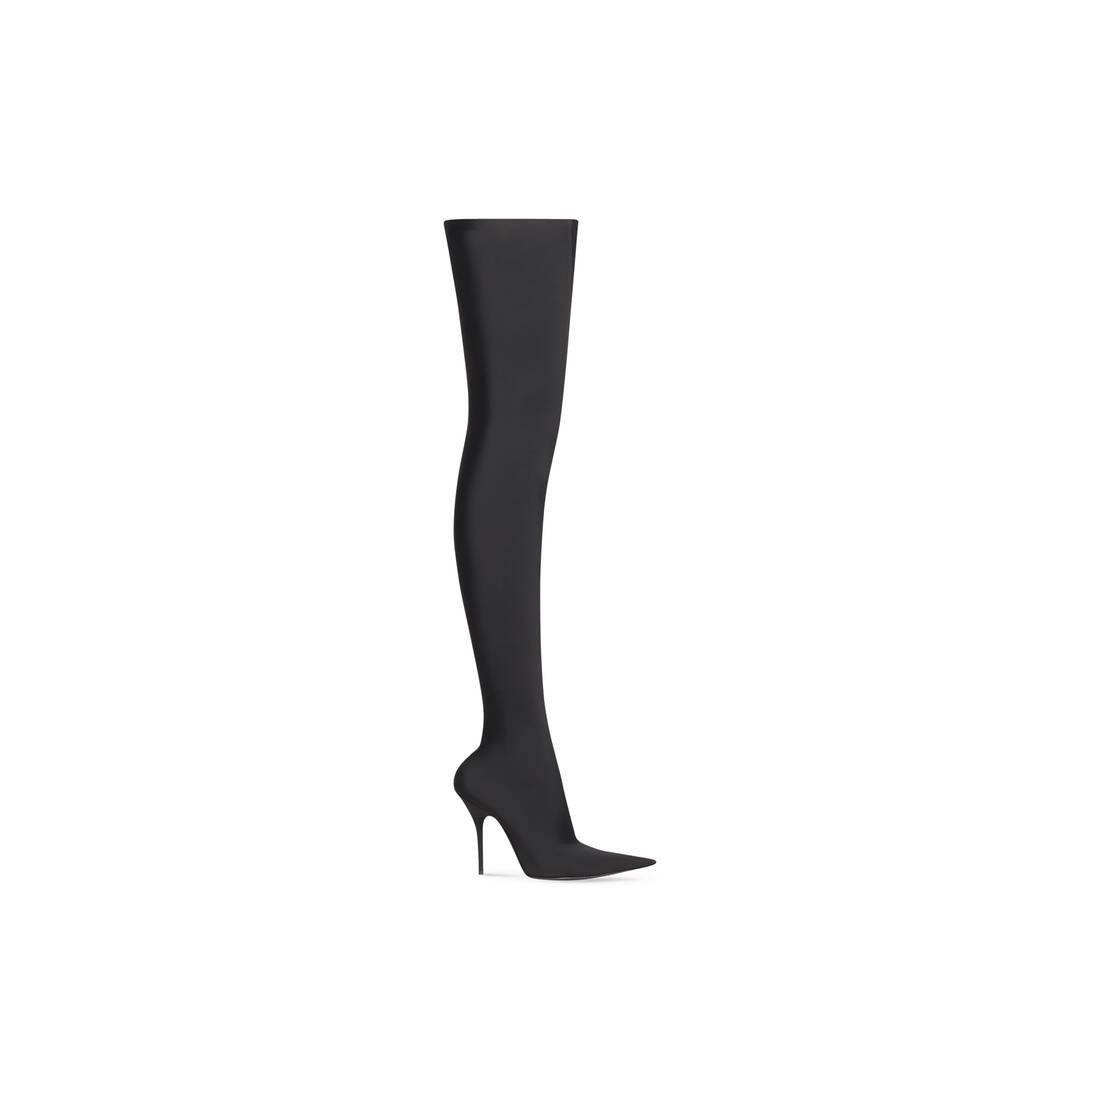 knife 110mm over-the-knee boot - 1